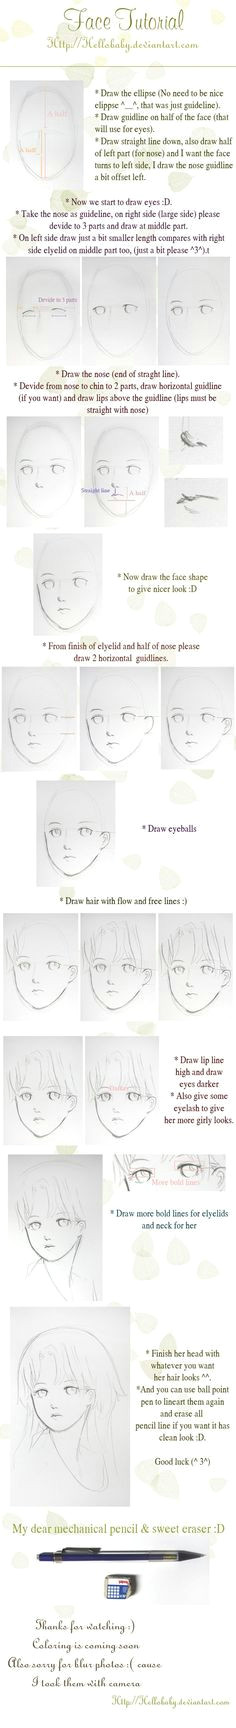 face tutorial hellobaby on deviantart how to draw anime face reference face drawing tutorial jpg 236x1728